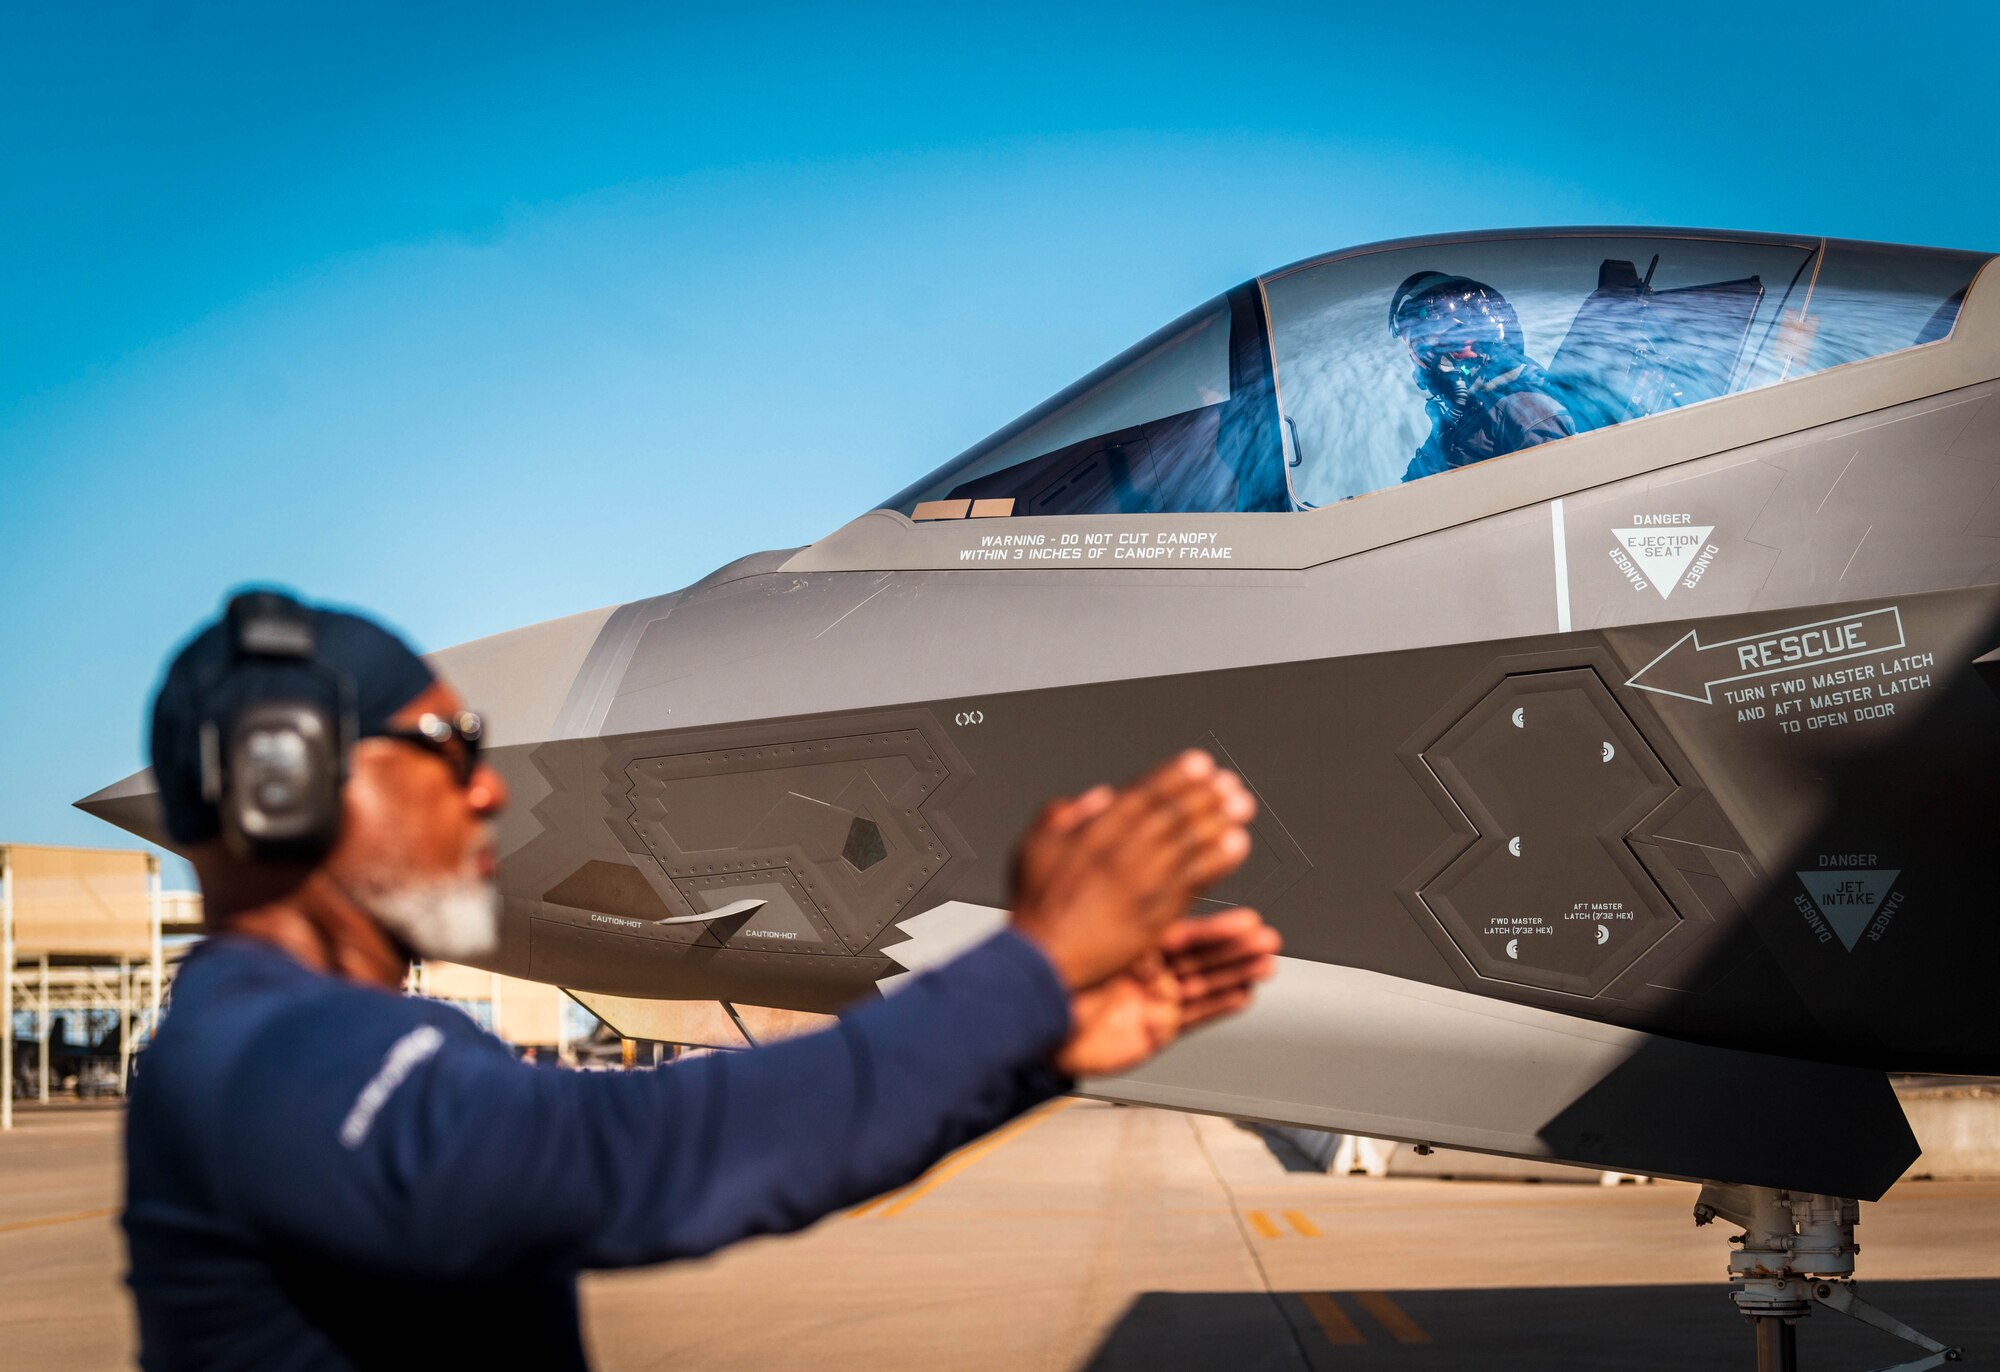 U.S. Air Force Lt. Col. Richard Peace, 187th Operations Support Squadron commander, looks to his crew chief Alden Beatty, 308th Fighter Squadron aircraft mechanic, as he prepares to takeoff in an F-35 Lightning II